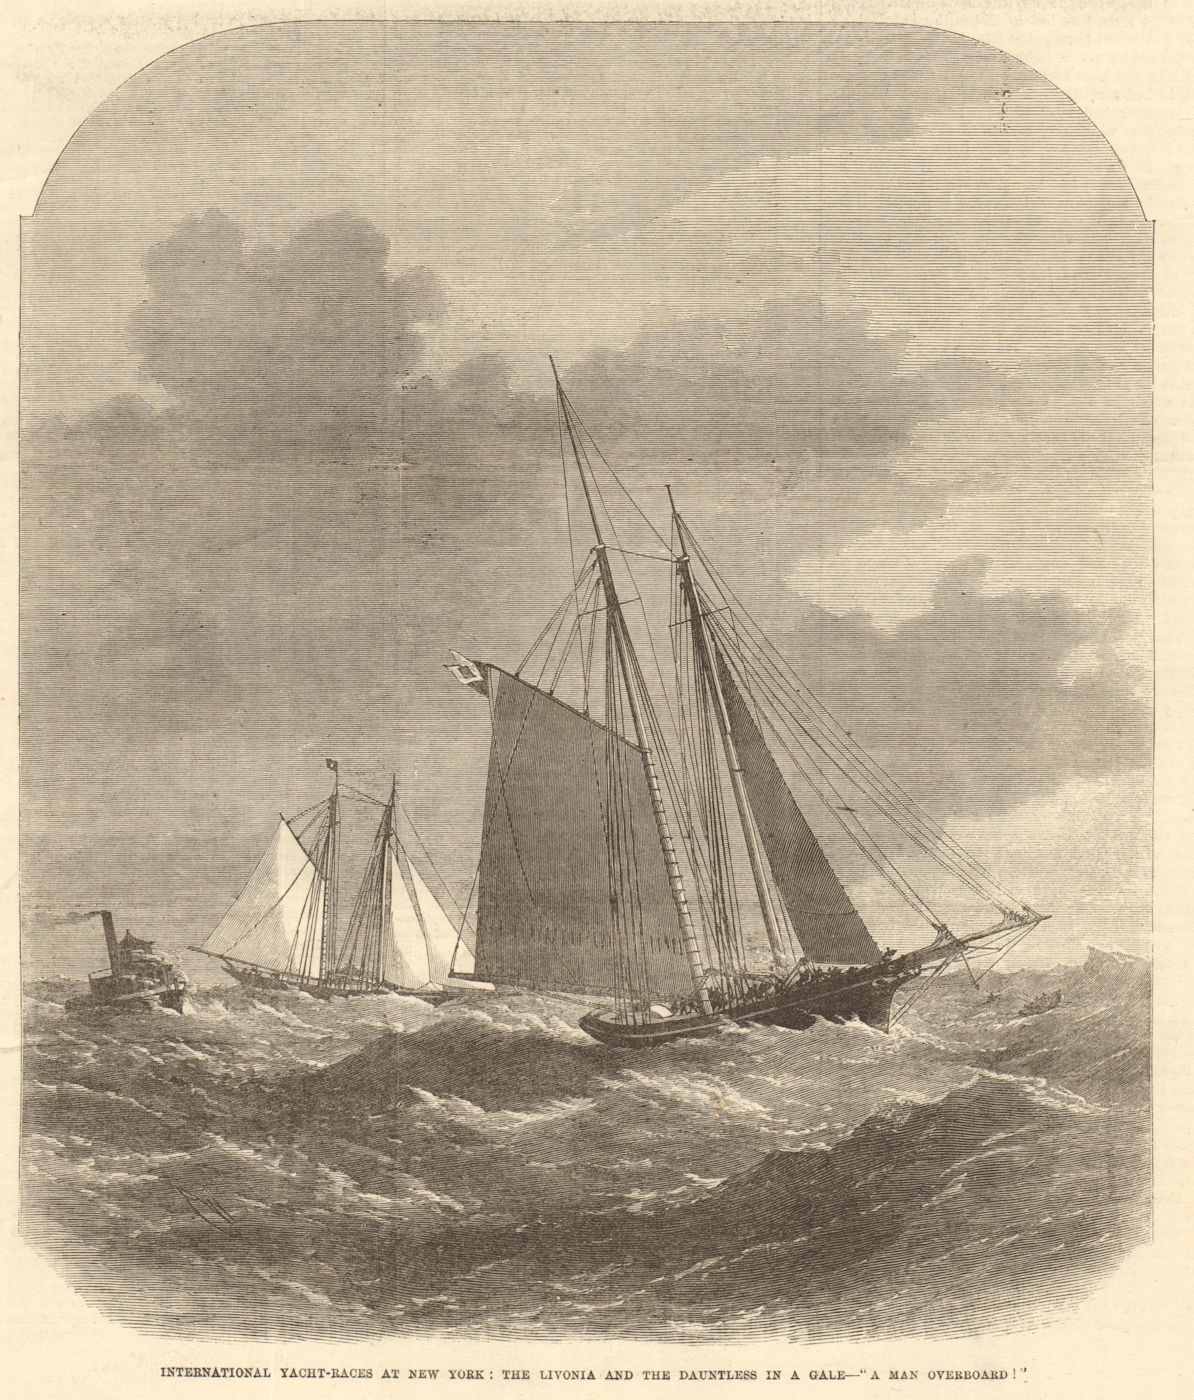 Americas Cup yacht races at New York. Livonia & Dauntless. Man overboard 1871